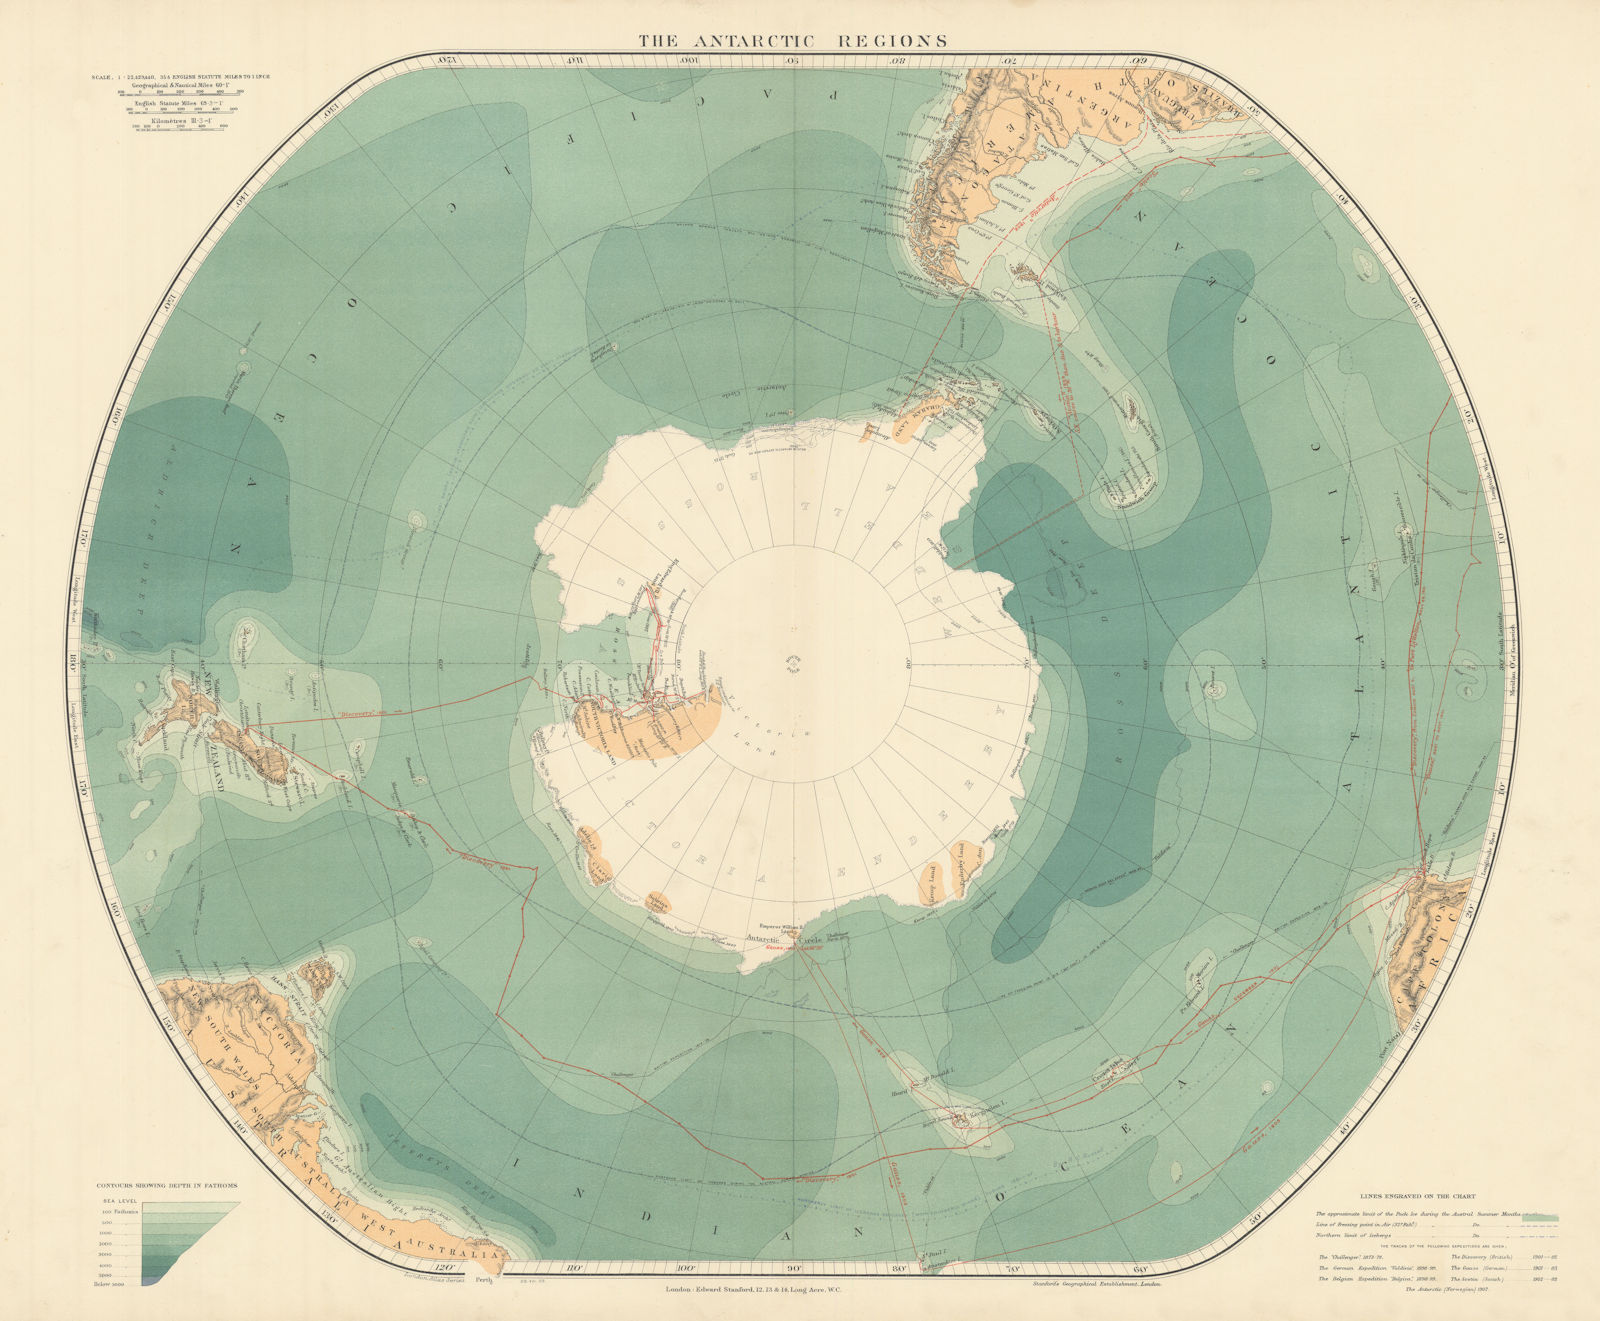 Antarctic Regions. South Pole. Discovery & Gauss routes. STANFORD 1904 old map